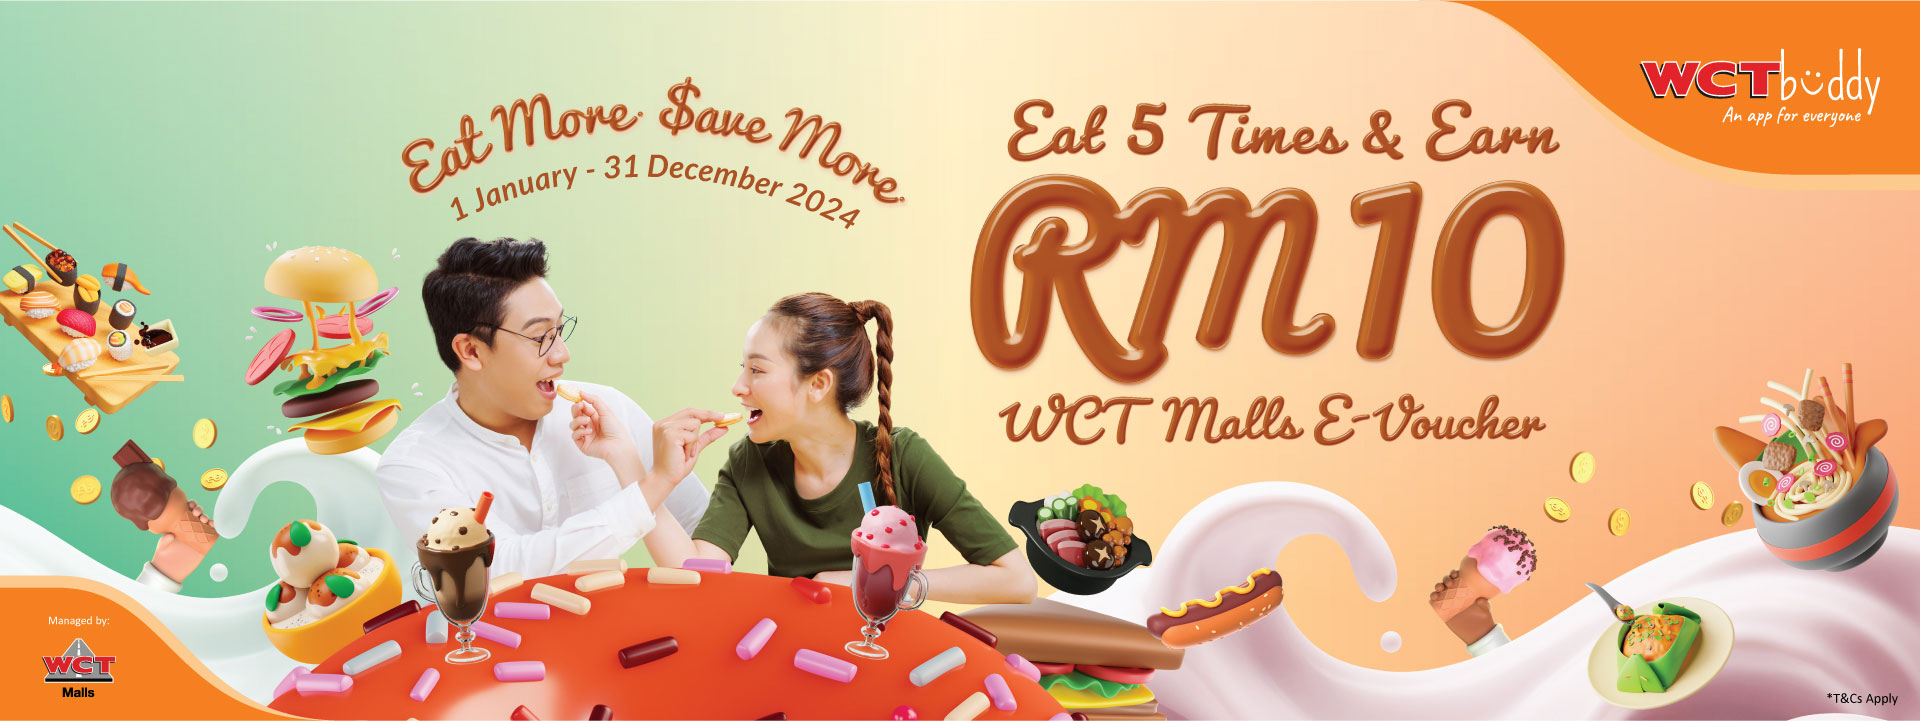 eat-more-save-more-banner.jpg